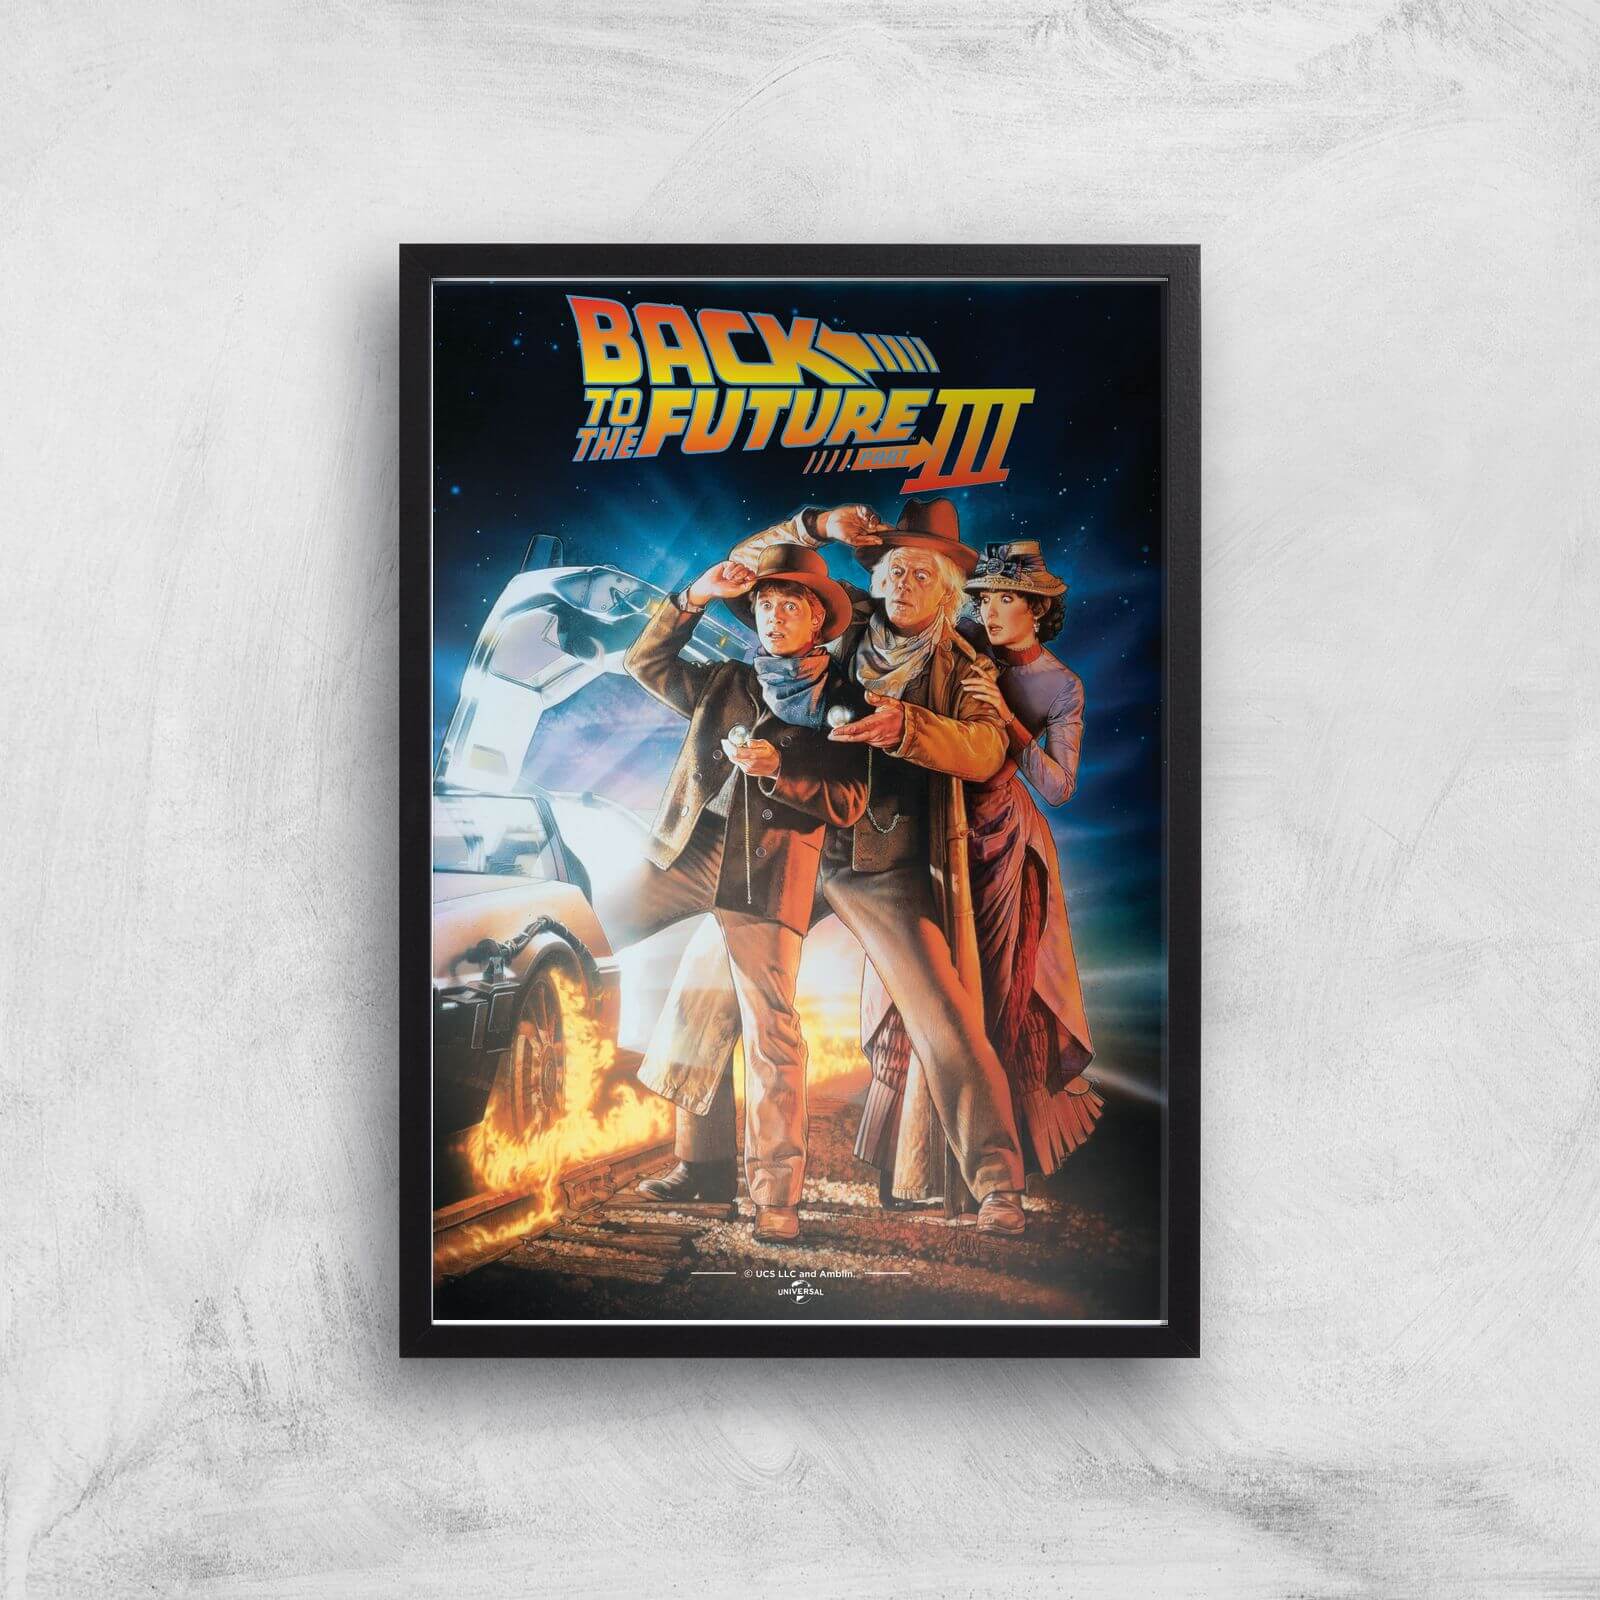 Back To The Future Part 3 Giclee Art Print - A2 - Black Frame